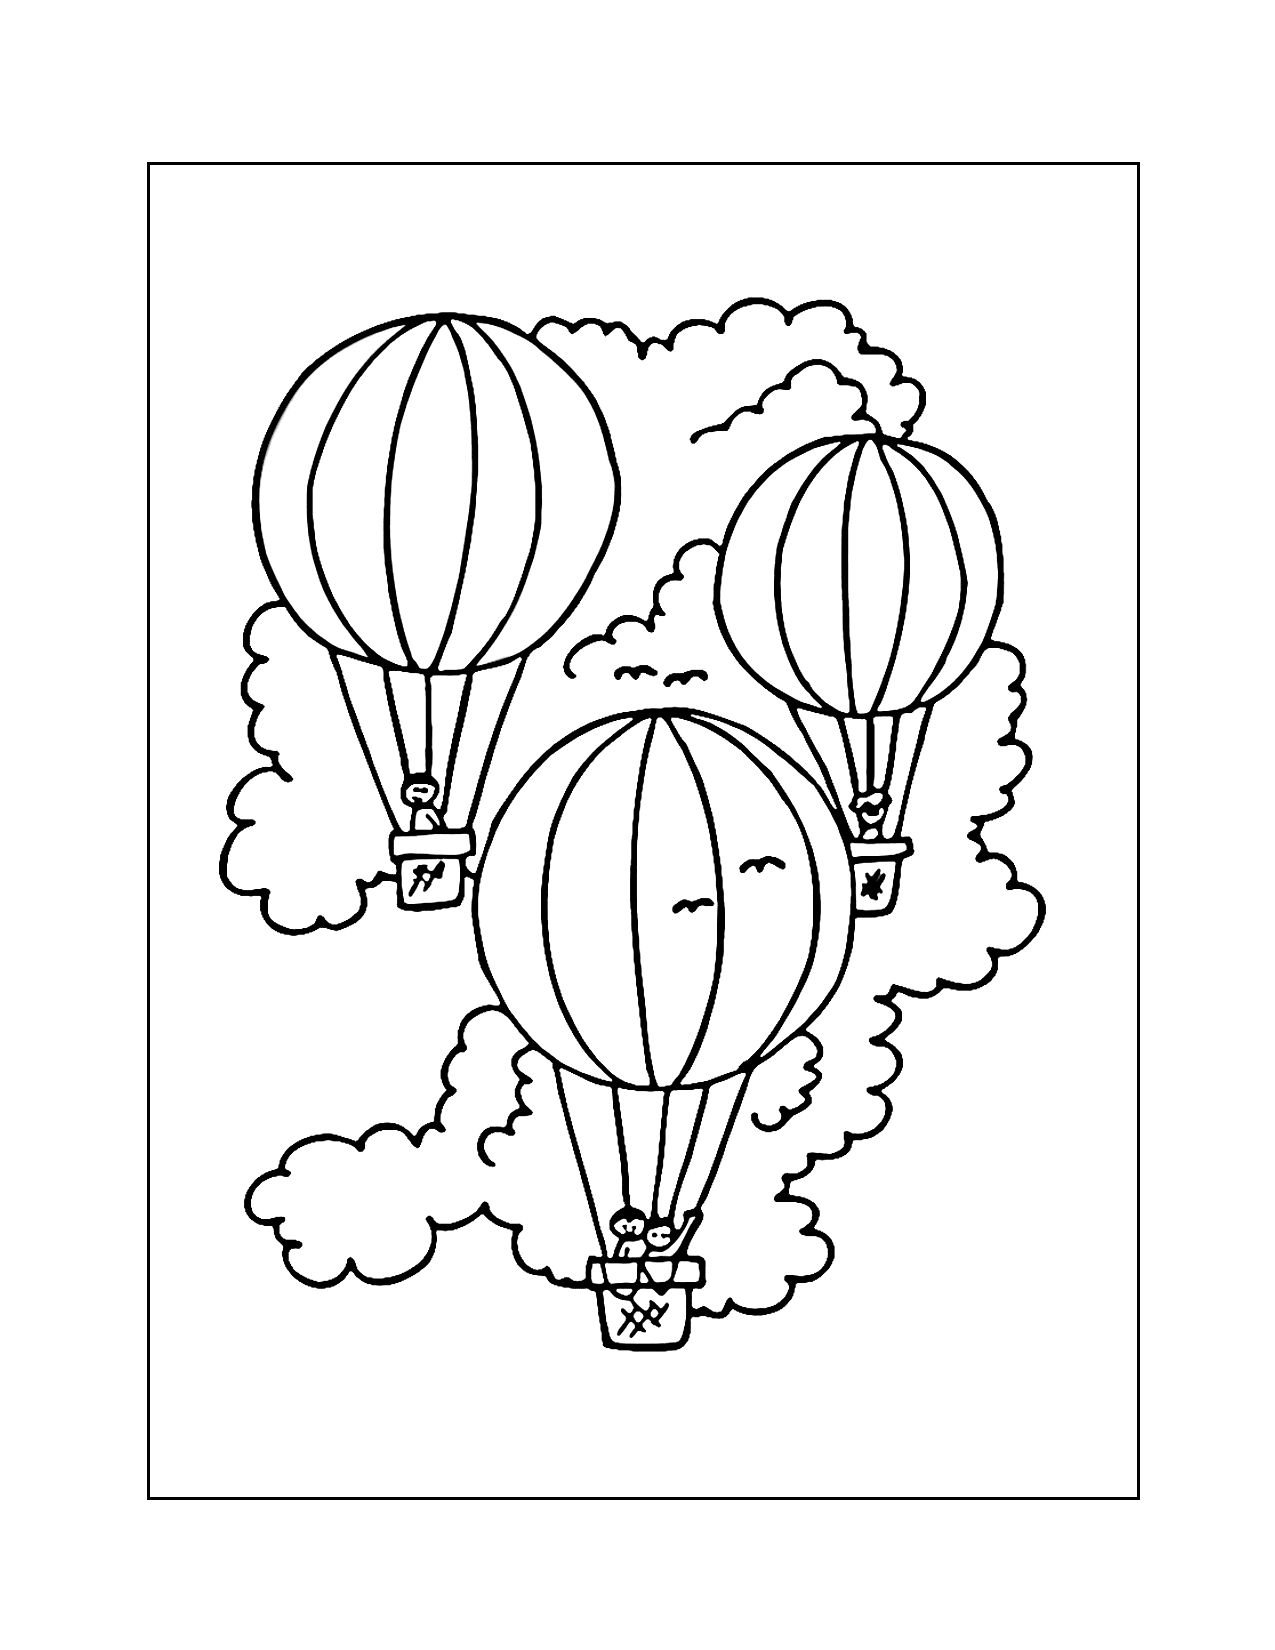 Happy People In Hot Air Balloons Coloring Page